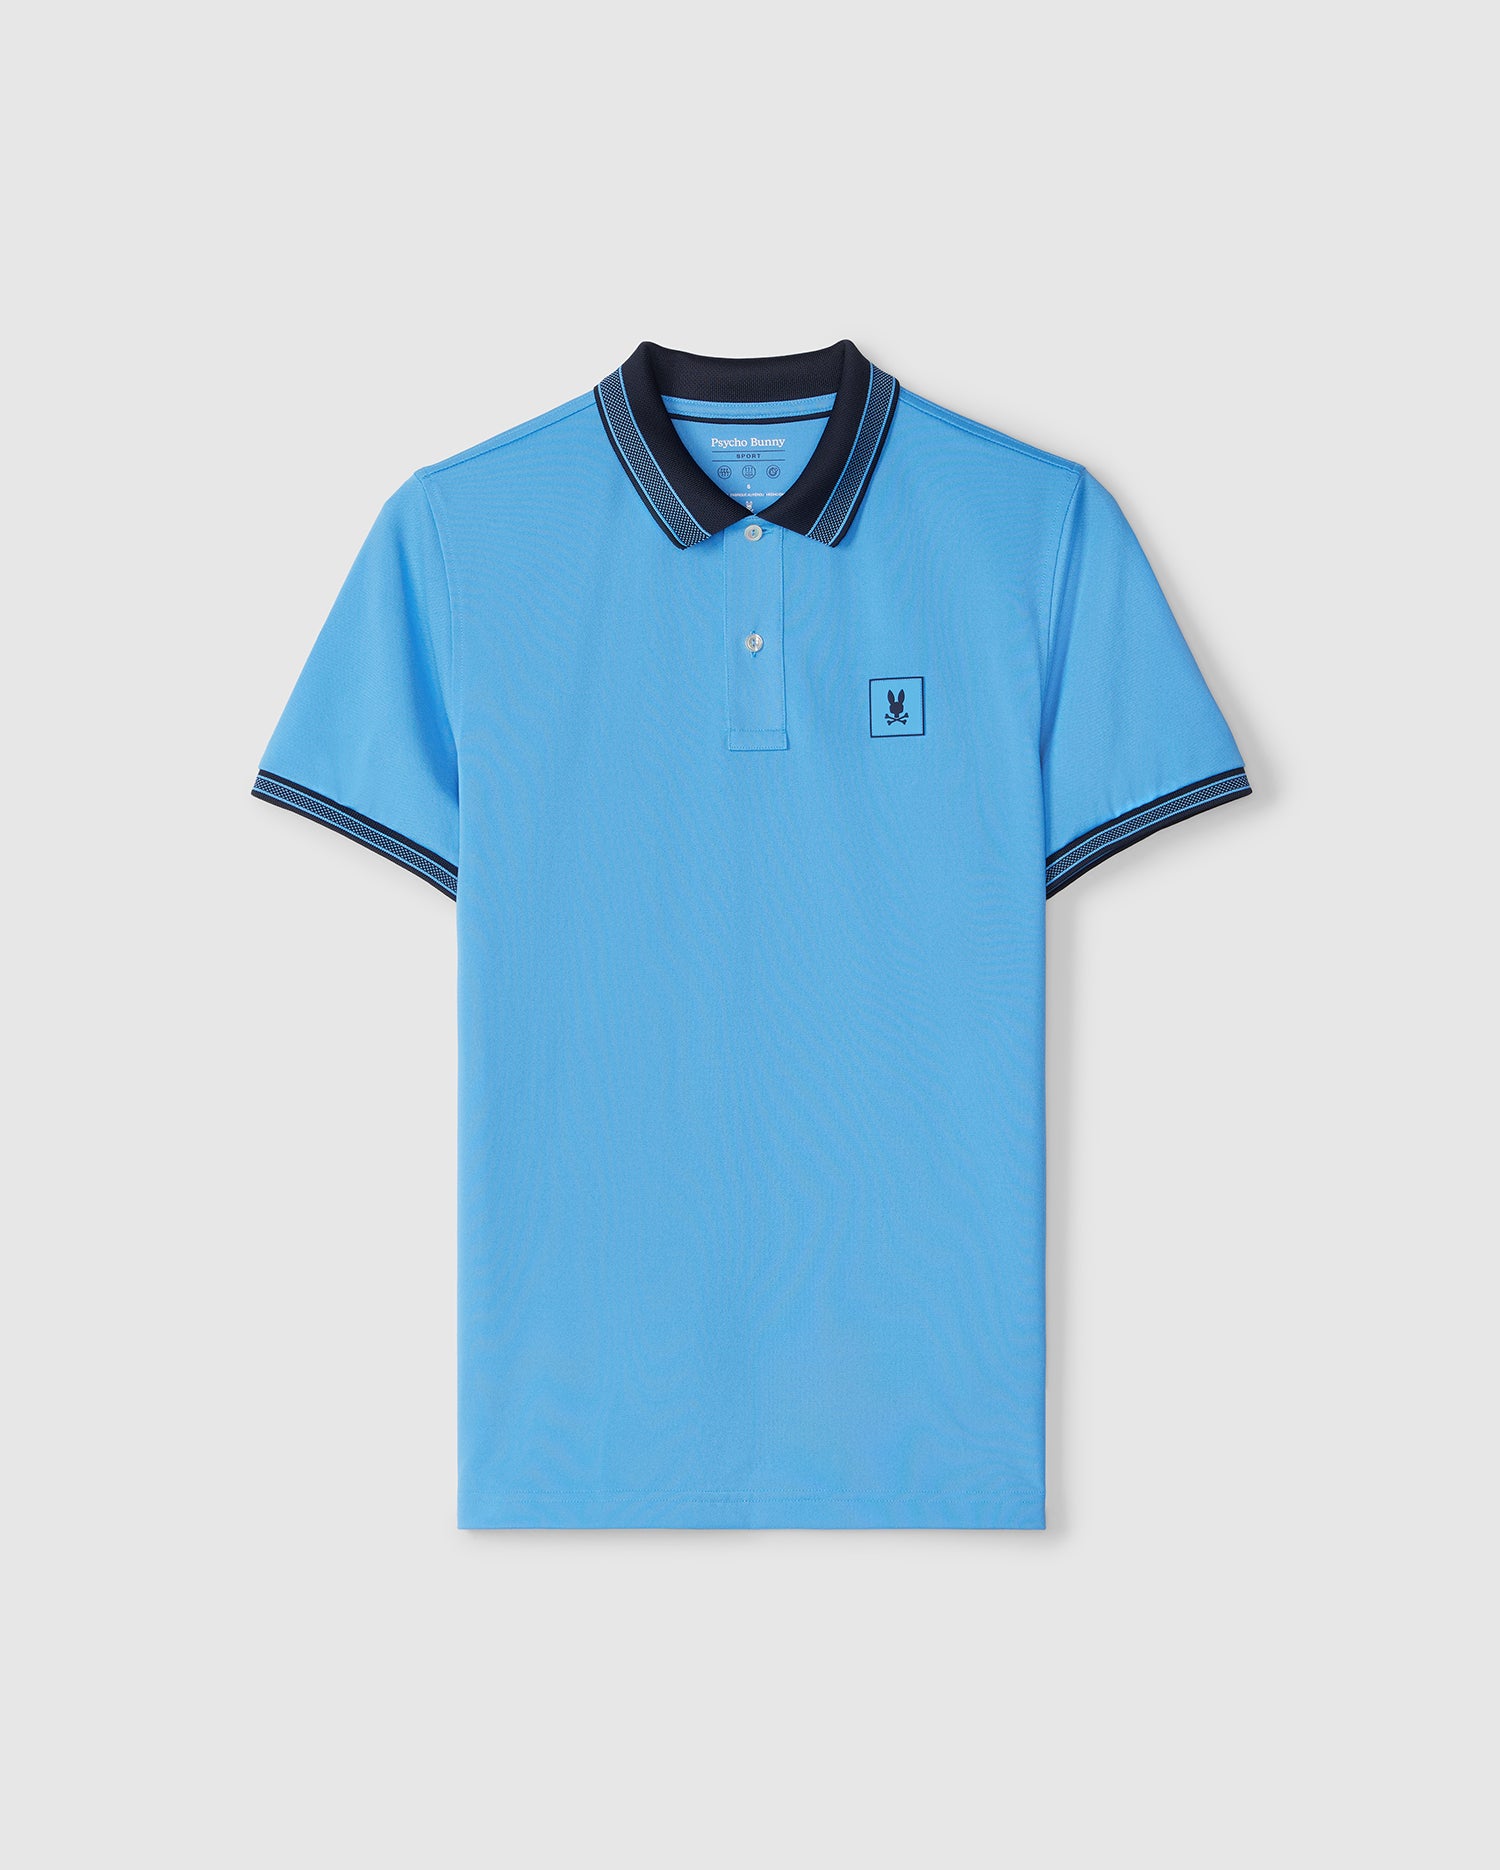 A sky blue Psycho Bunny MENS TARRYTOWN SPORT POLO - B6K333B200 with dark blue edges on the collar and sleeves. The shirt, part of our sport-forward line, features a small embroidered logo on the left chest and is crafted from breathable material. The background is plain white.